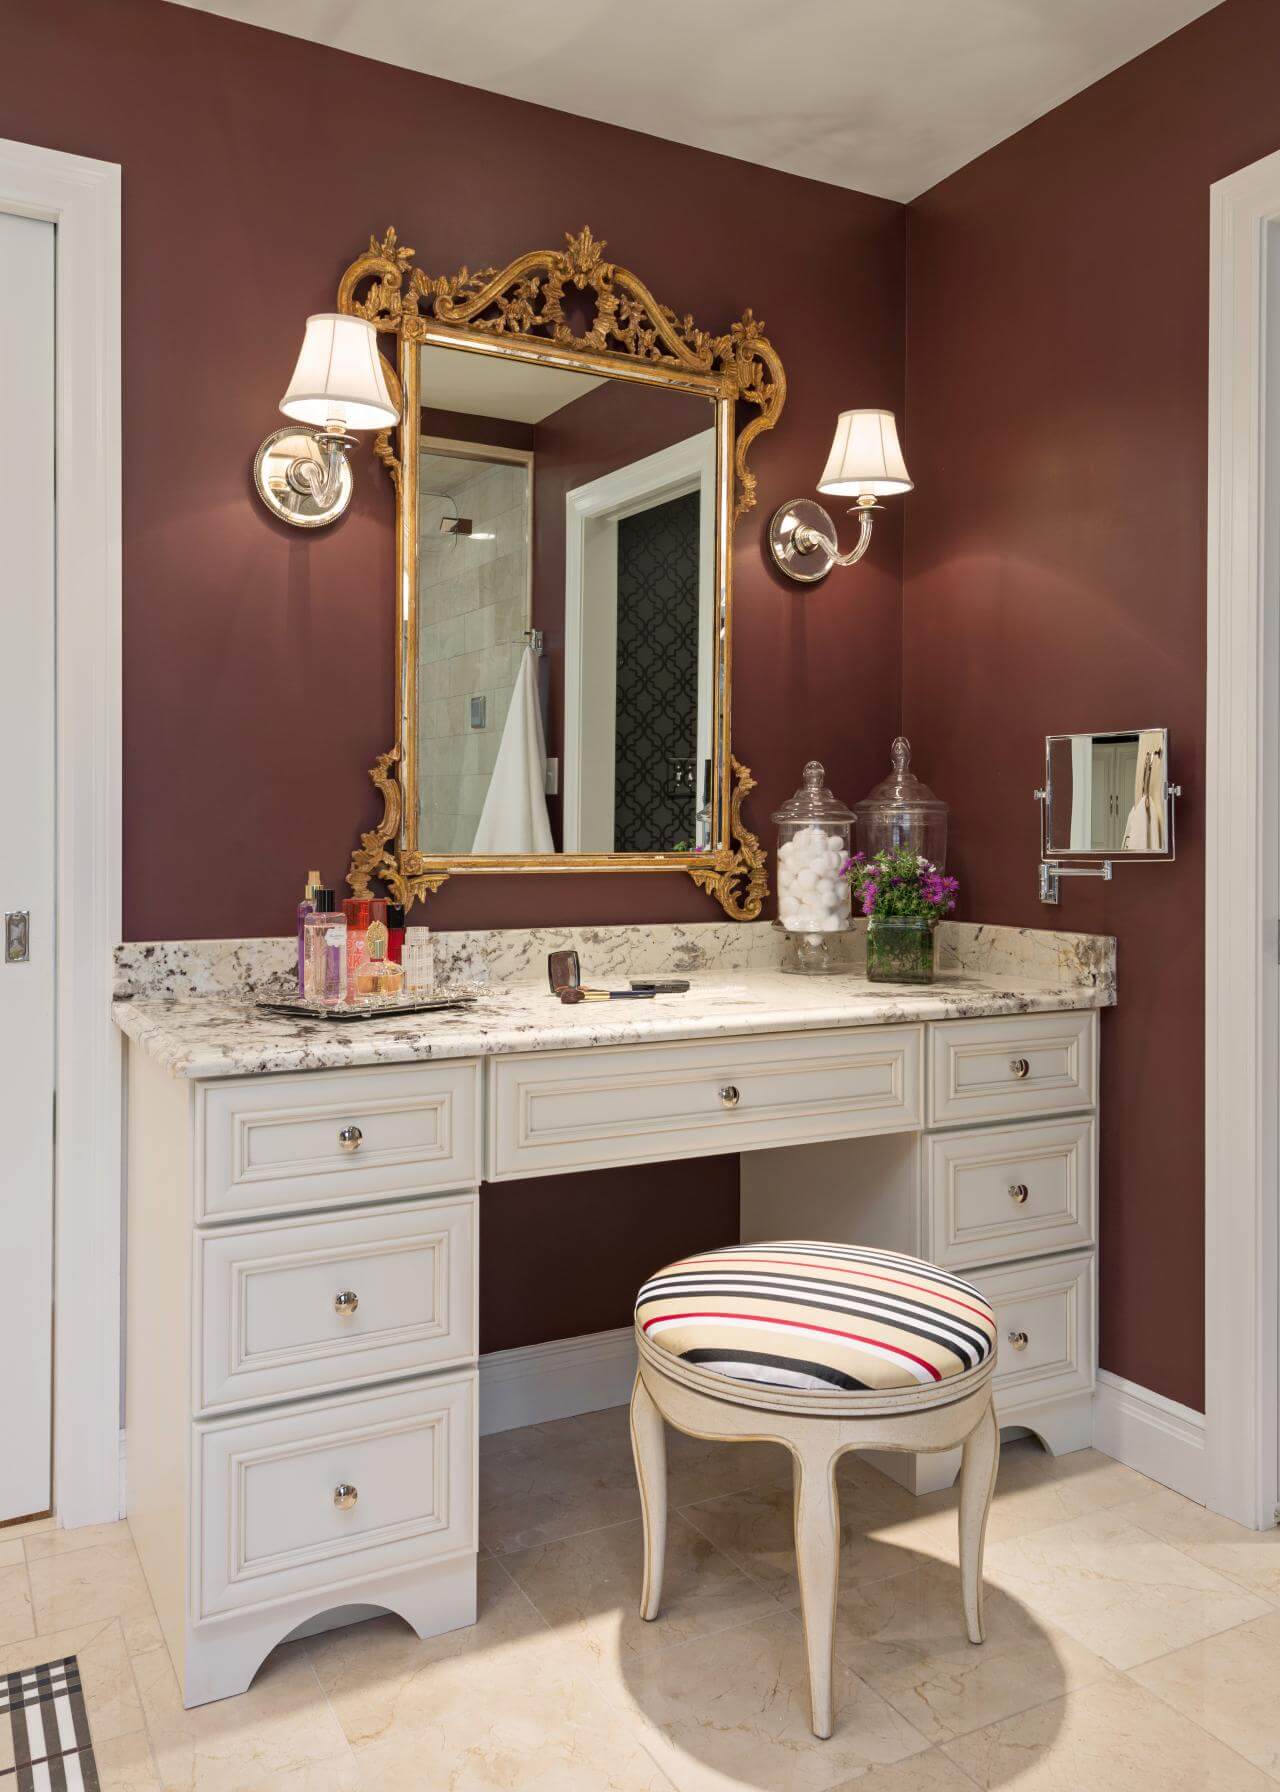 decorating ideas for makeup vanity